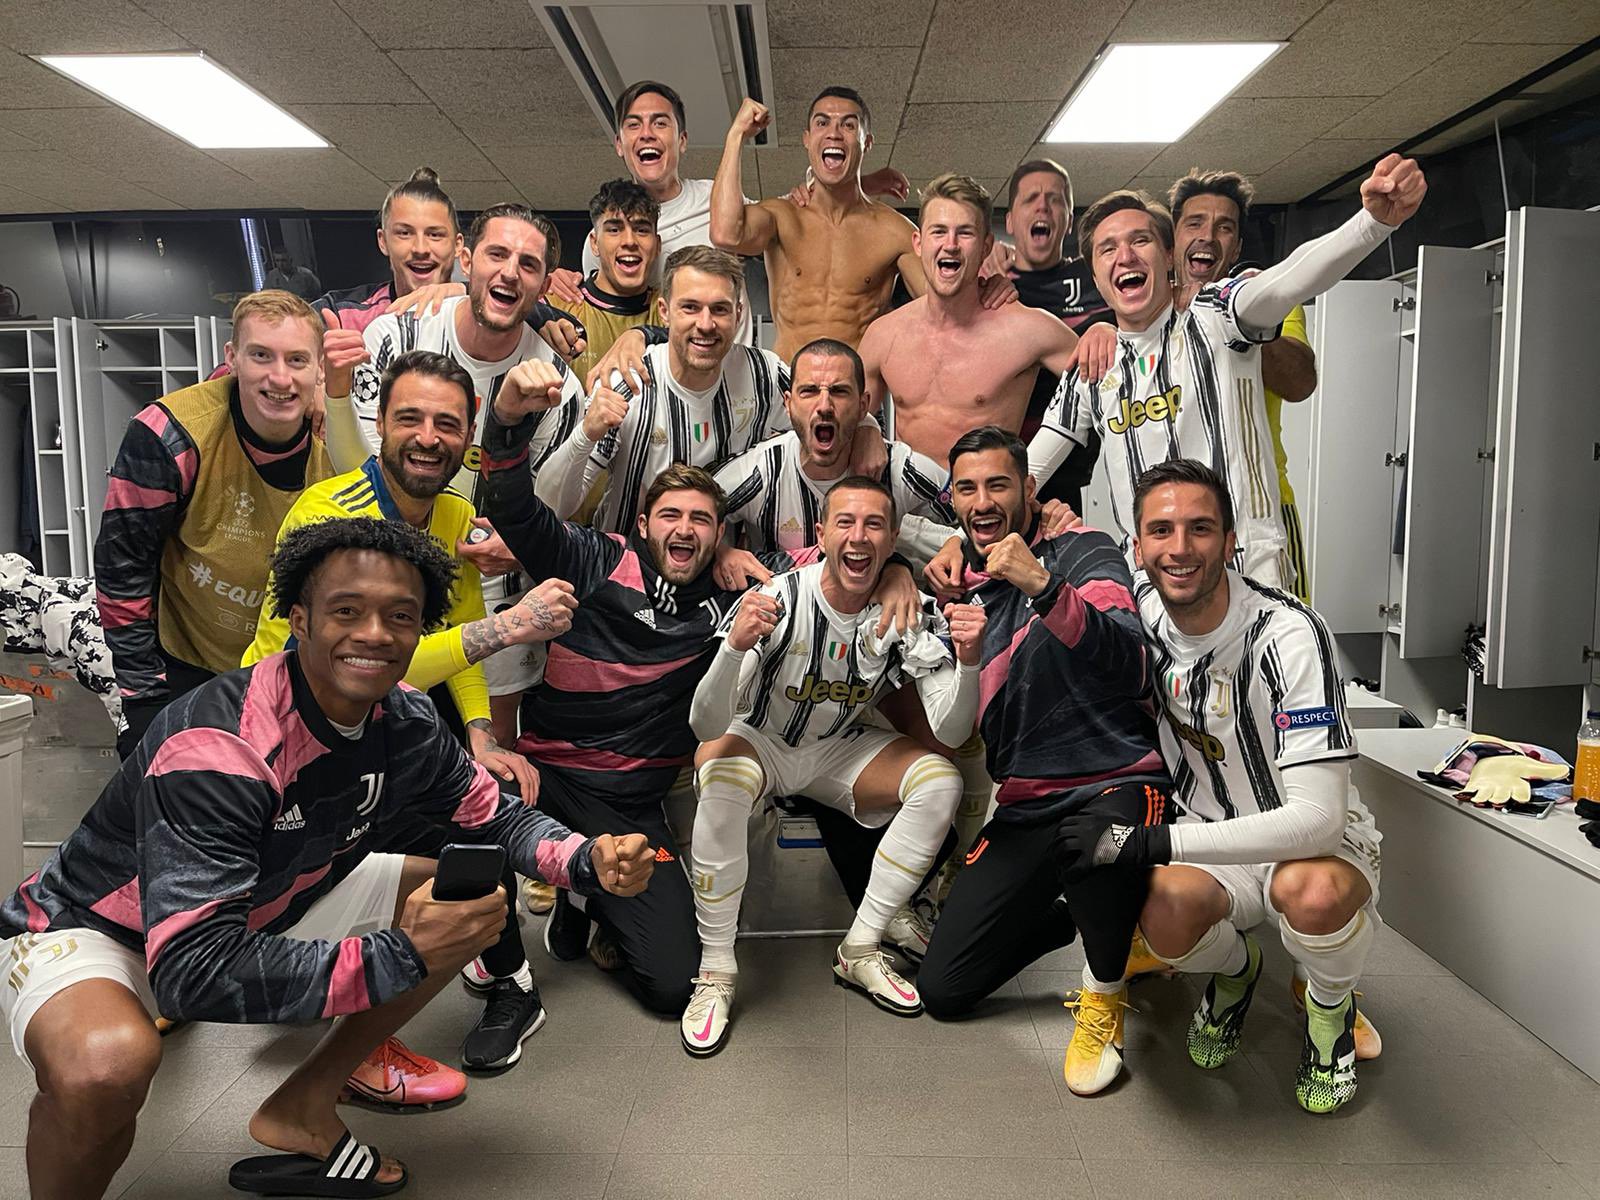 Juventus tops group G after defeating Barcelona 3-0